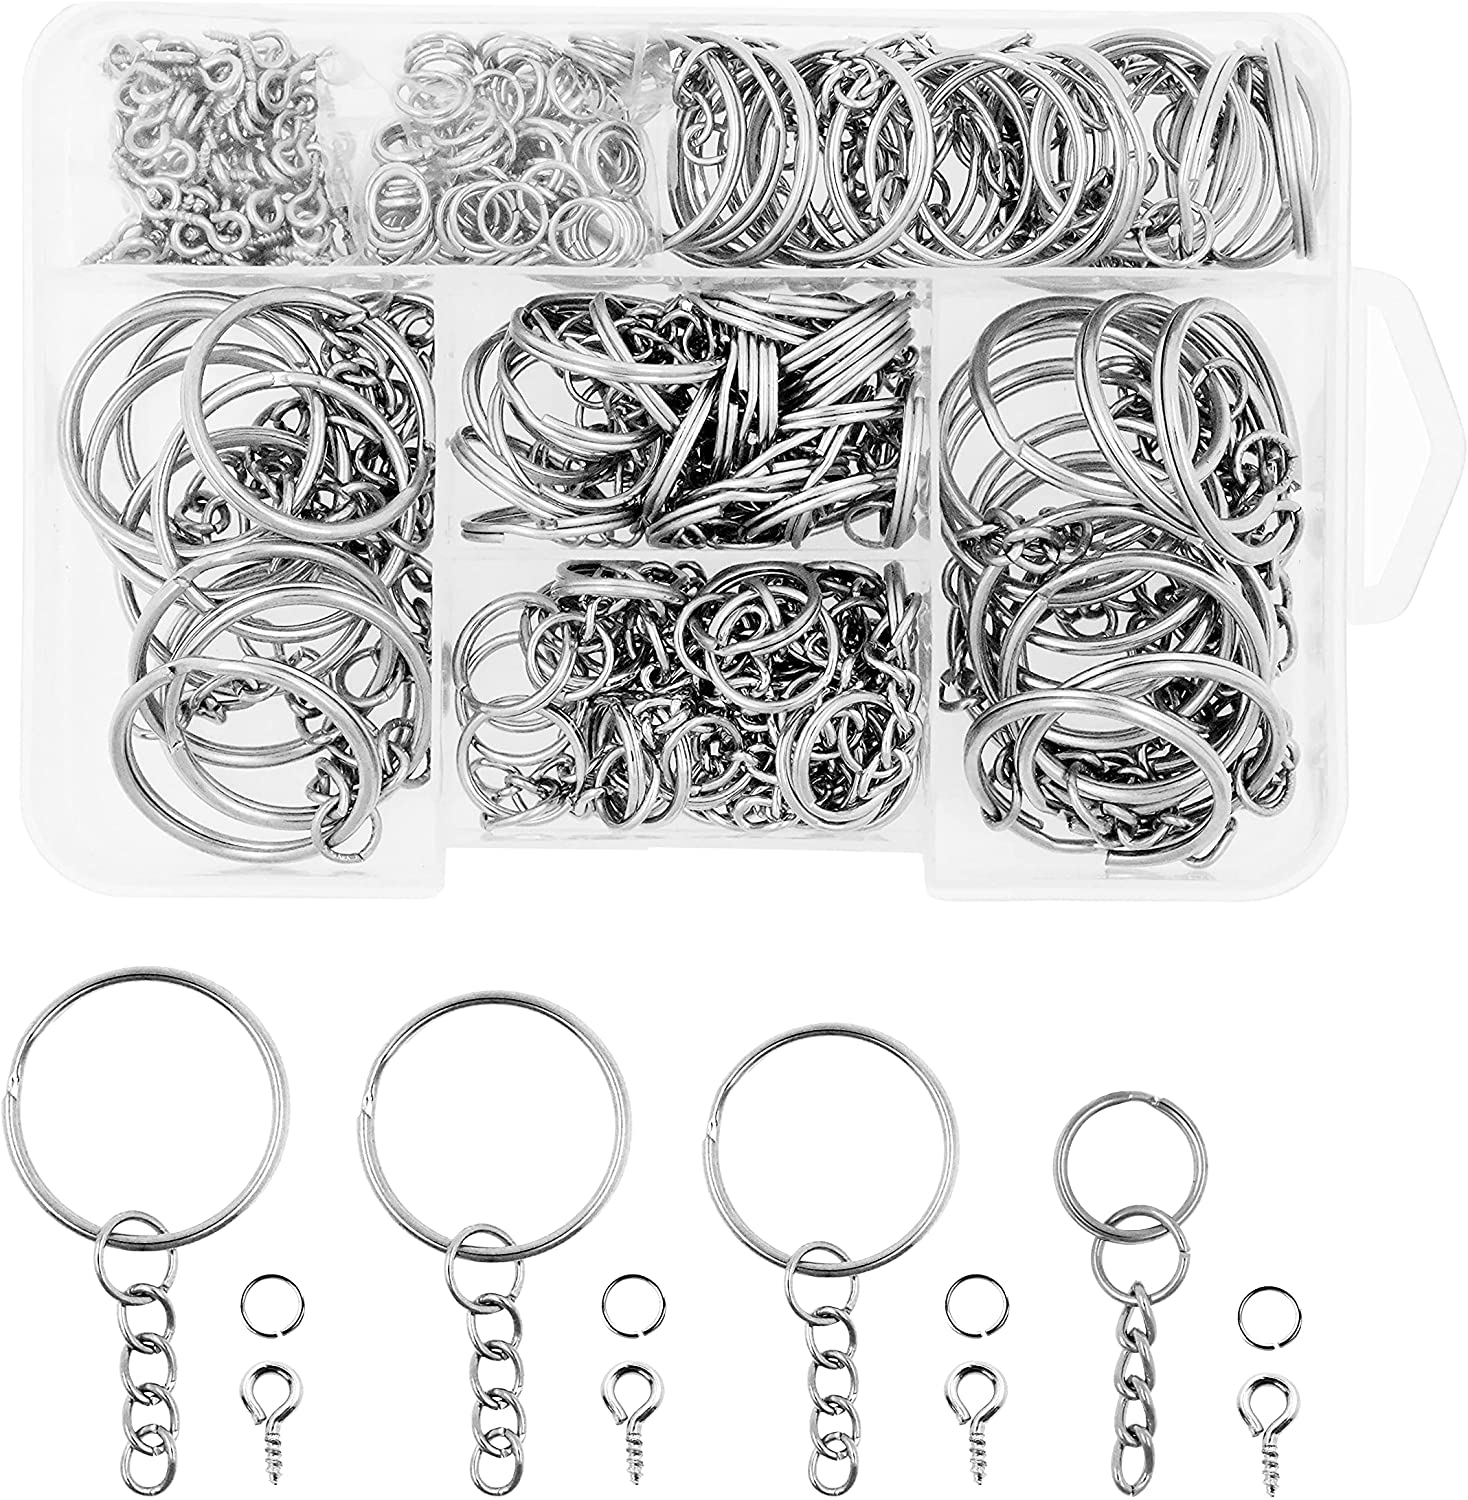 Metal Keychain Rings Bulk for Resin, DIY Crafts and Jewelry Making